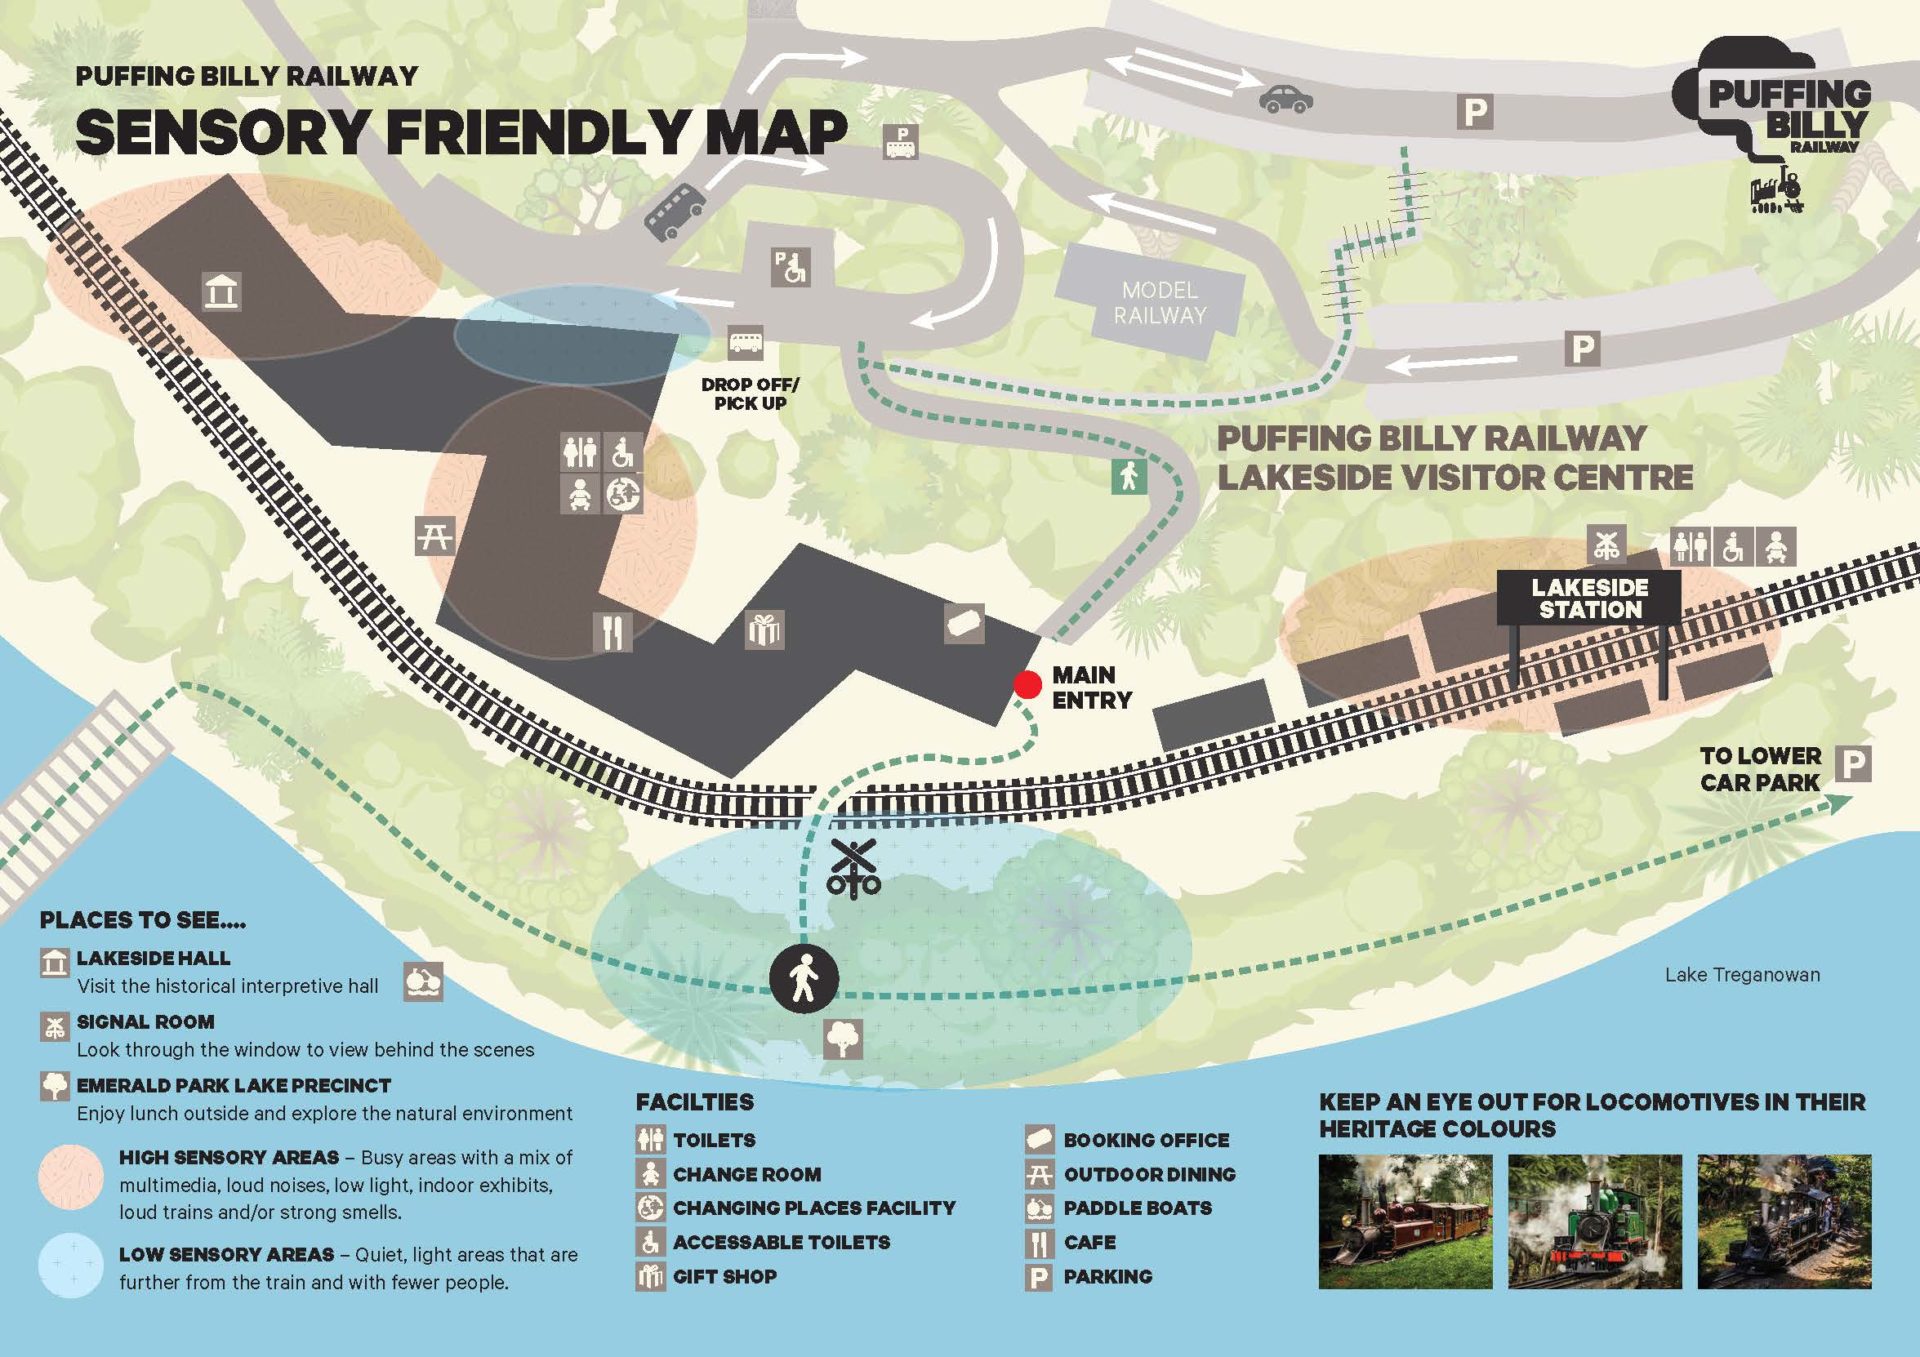 Map of the Lakeside Visitor Centre and surrounding area, highlighting low sensory and high sensory areas as well as parking, access and facilities.. 